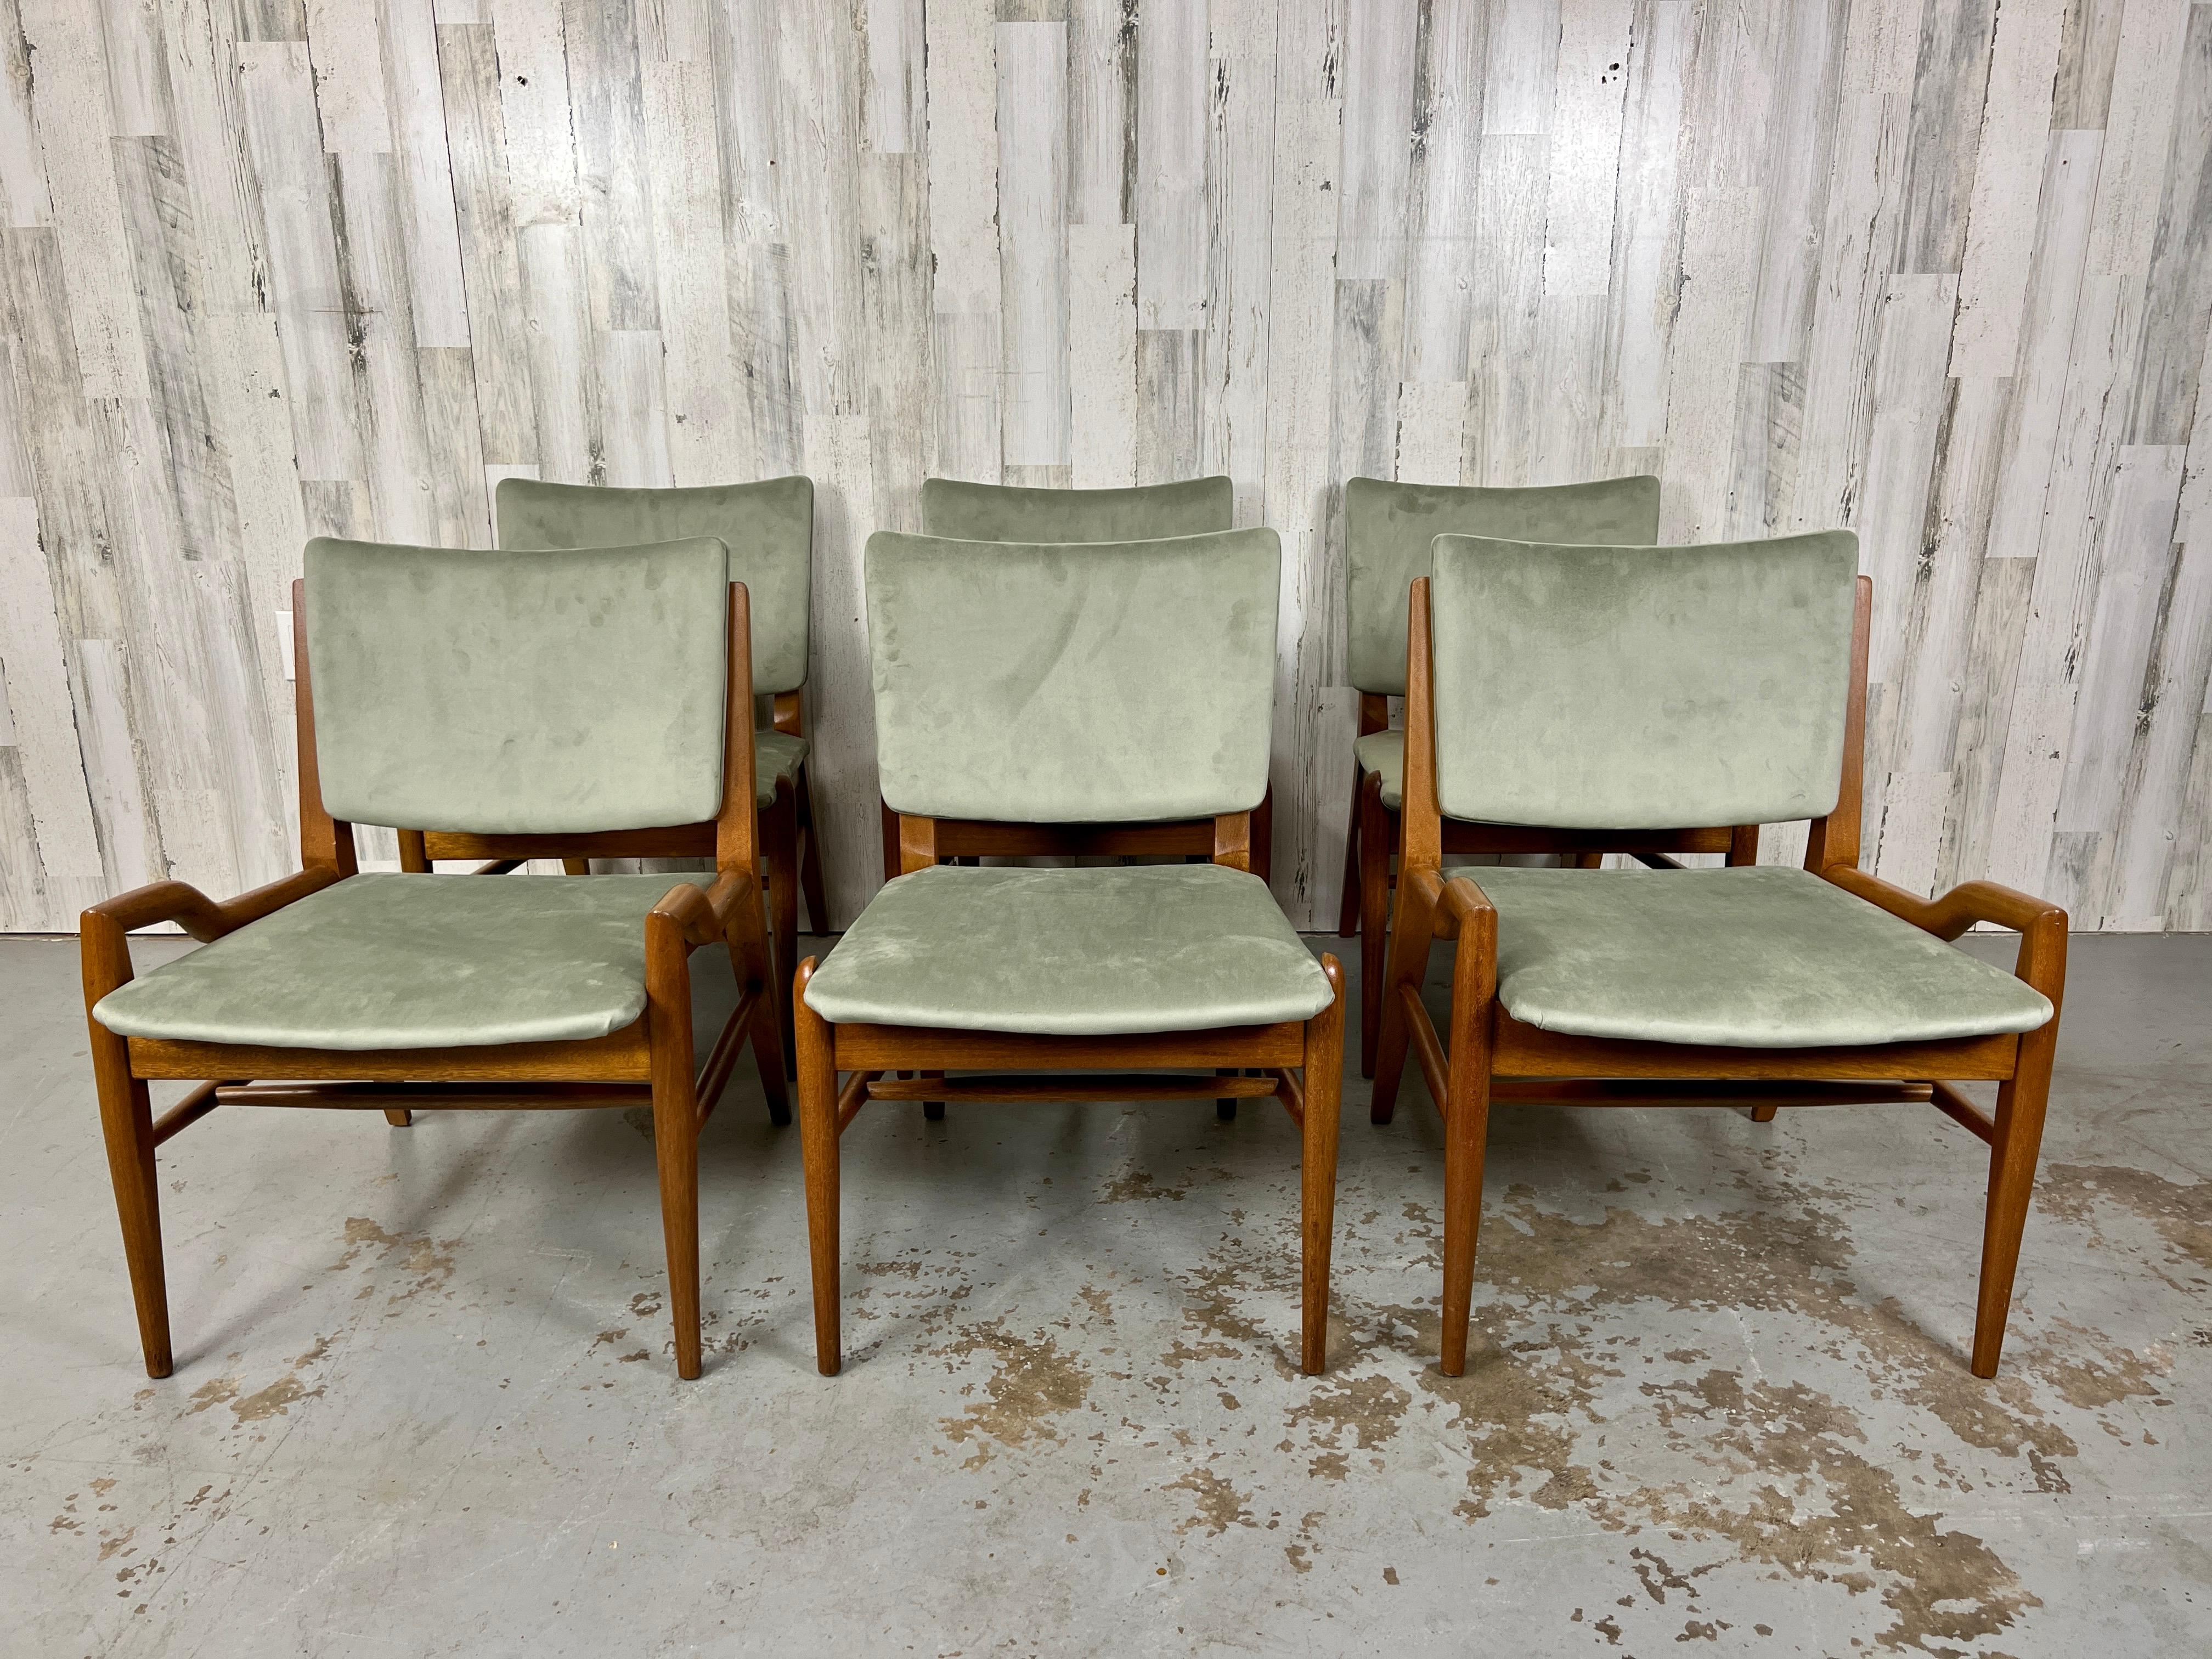 Classic Mid Century Design by John Keal for Brown Saltman furniture.
Newly refinished in a satin light walnut with sage green upholstery

Arm chairs measure: 24 1/2 deep x 22 1/4 wide x 30 1/4 high x seat height 16 1/4.